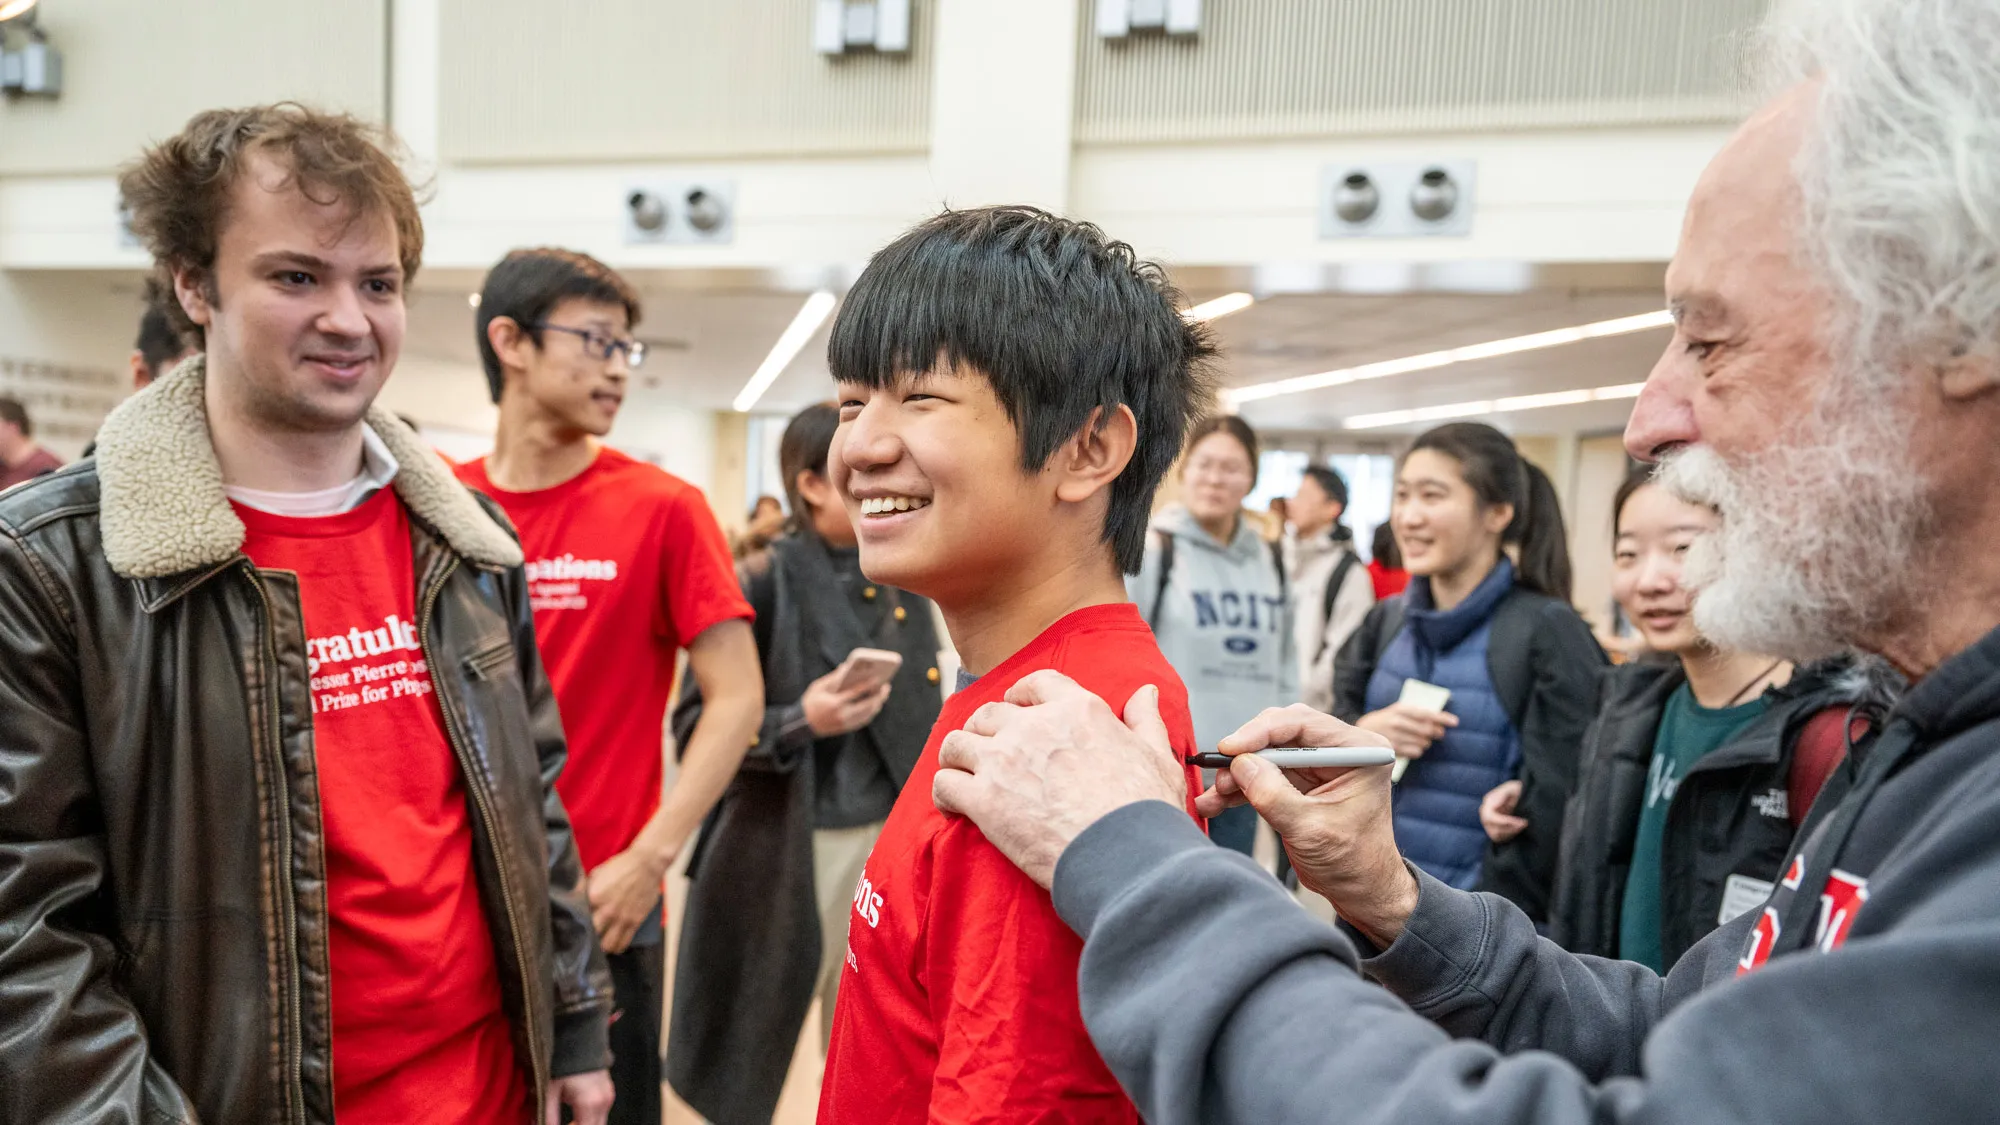 Agostini uses a Sharpie to sign the back of a T-shirt worn by a student of Asian descent. The young man grins and others around them smile as they watch. 